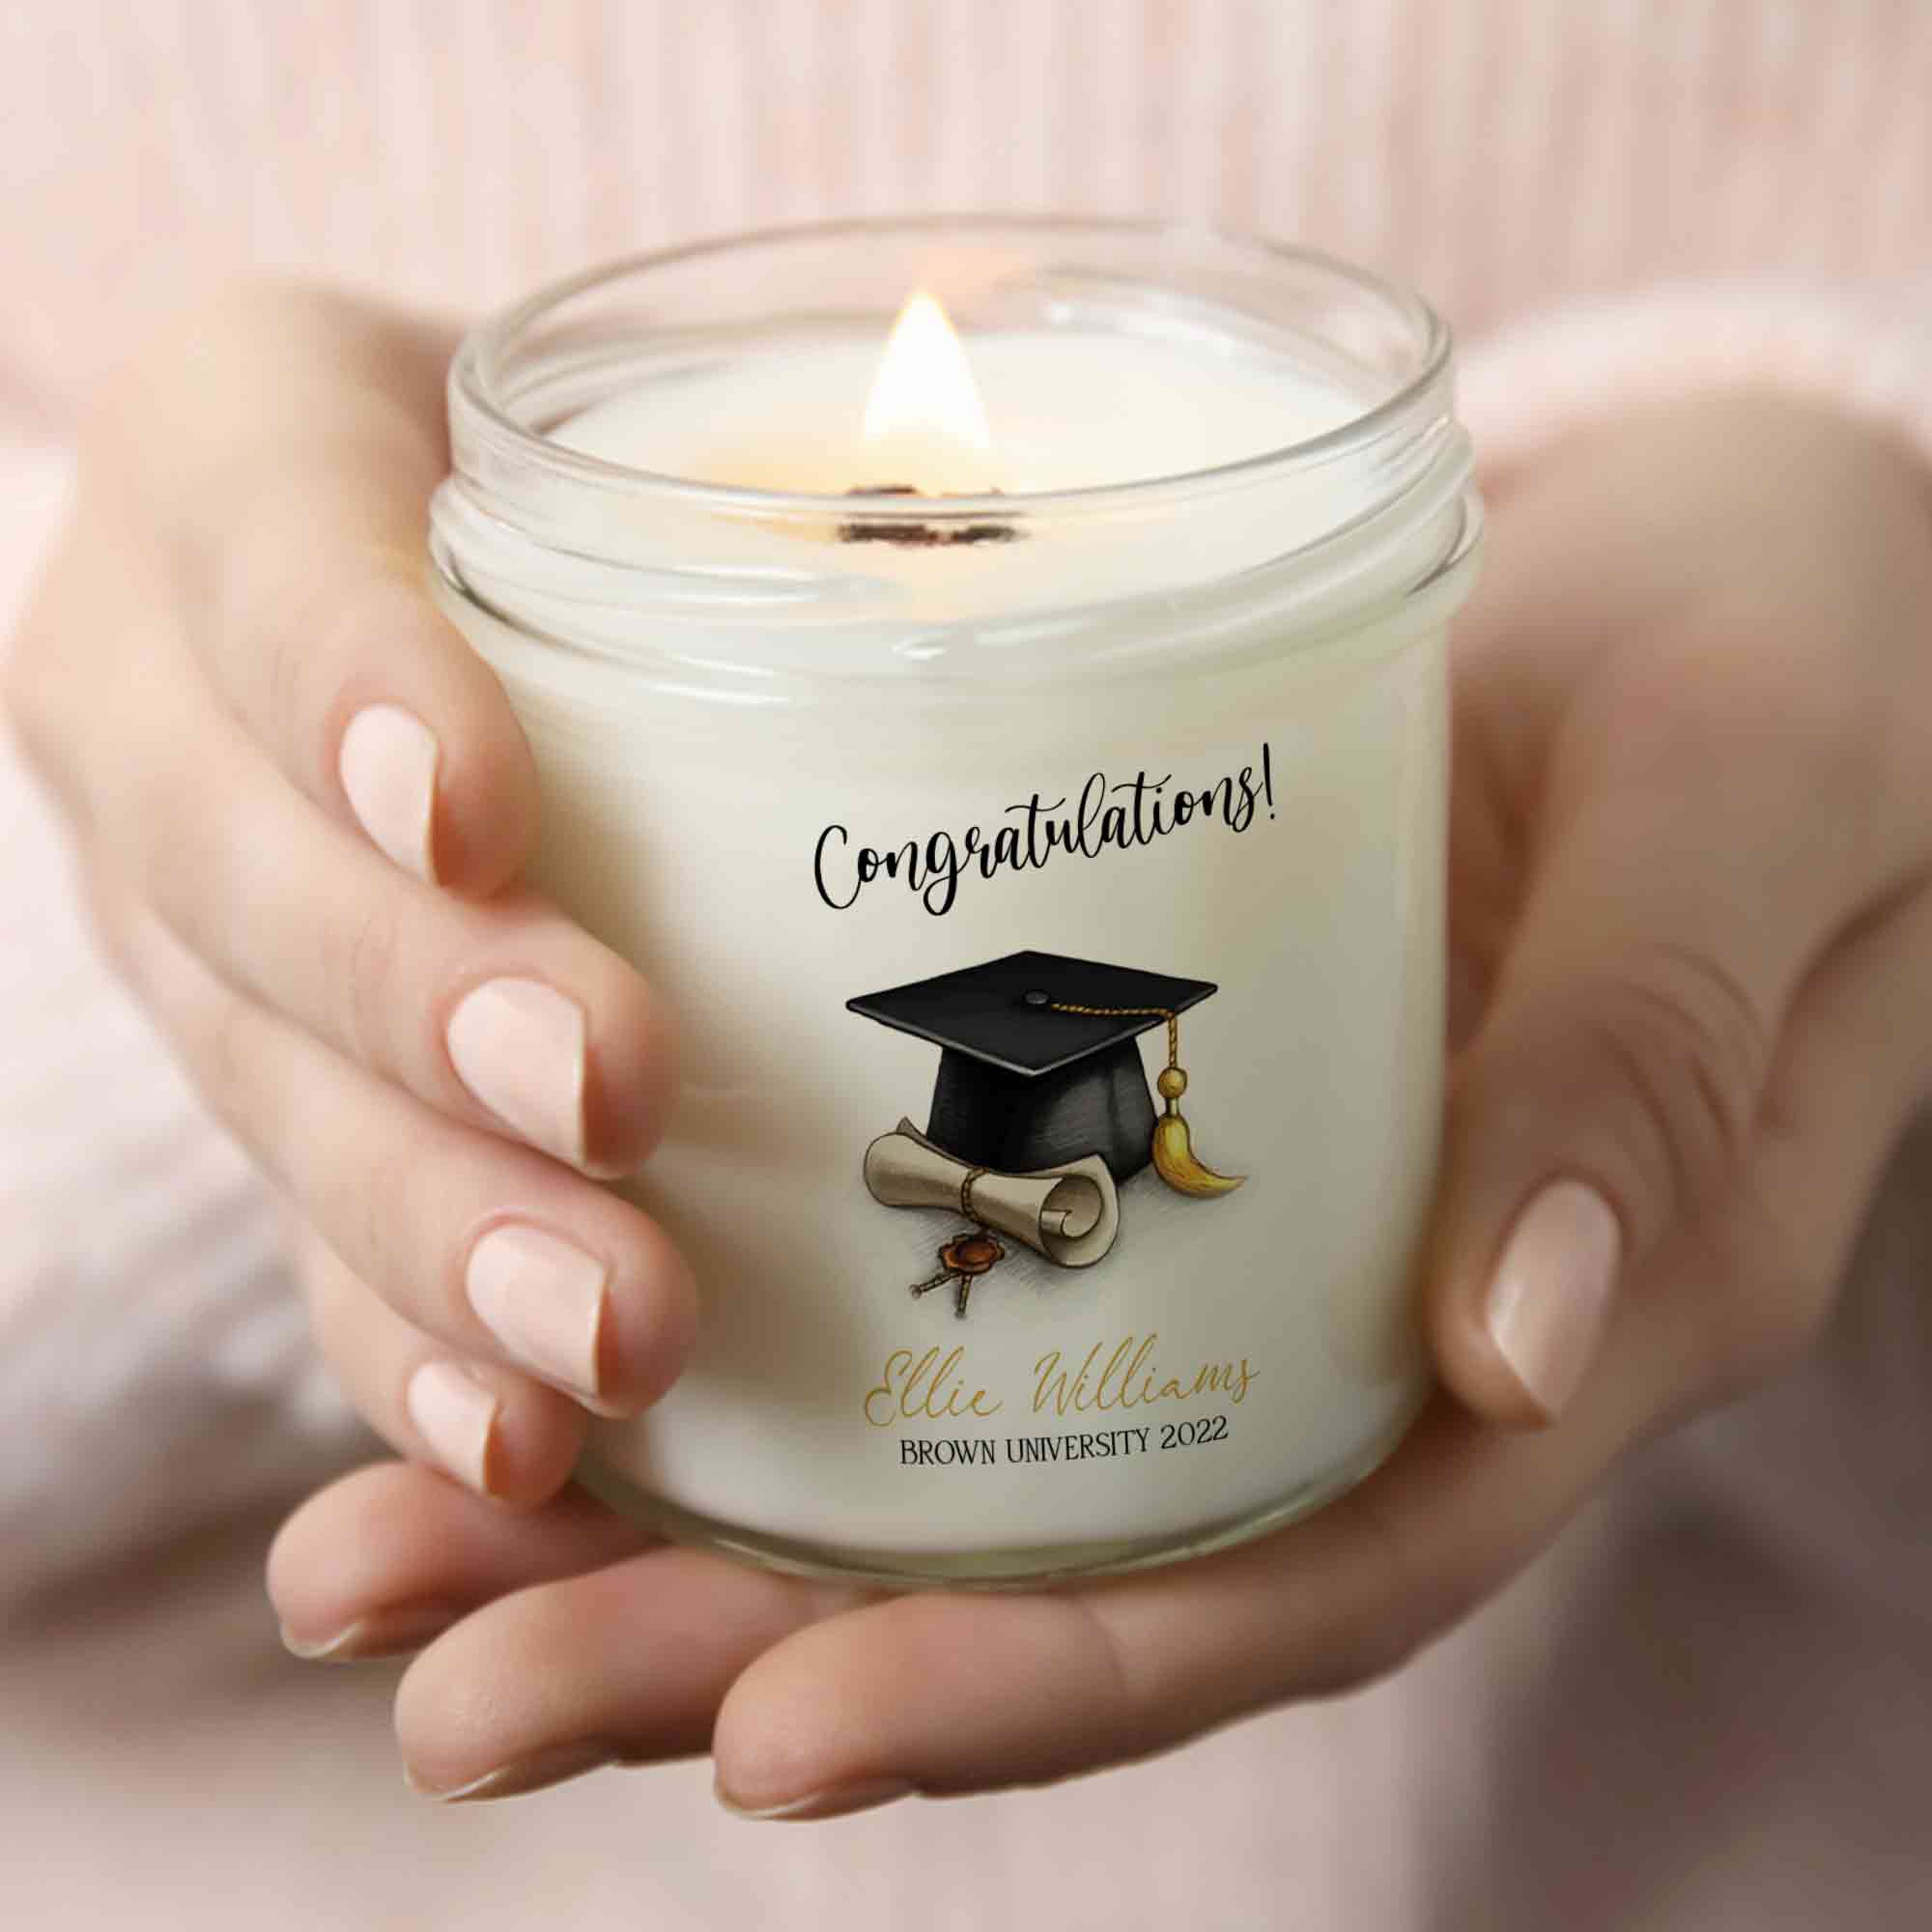 Congratulations Gift For College Graduation 2022, Unique Candle For Graduation, Custom Graduation Candle Gift